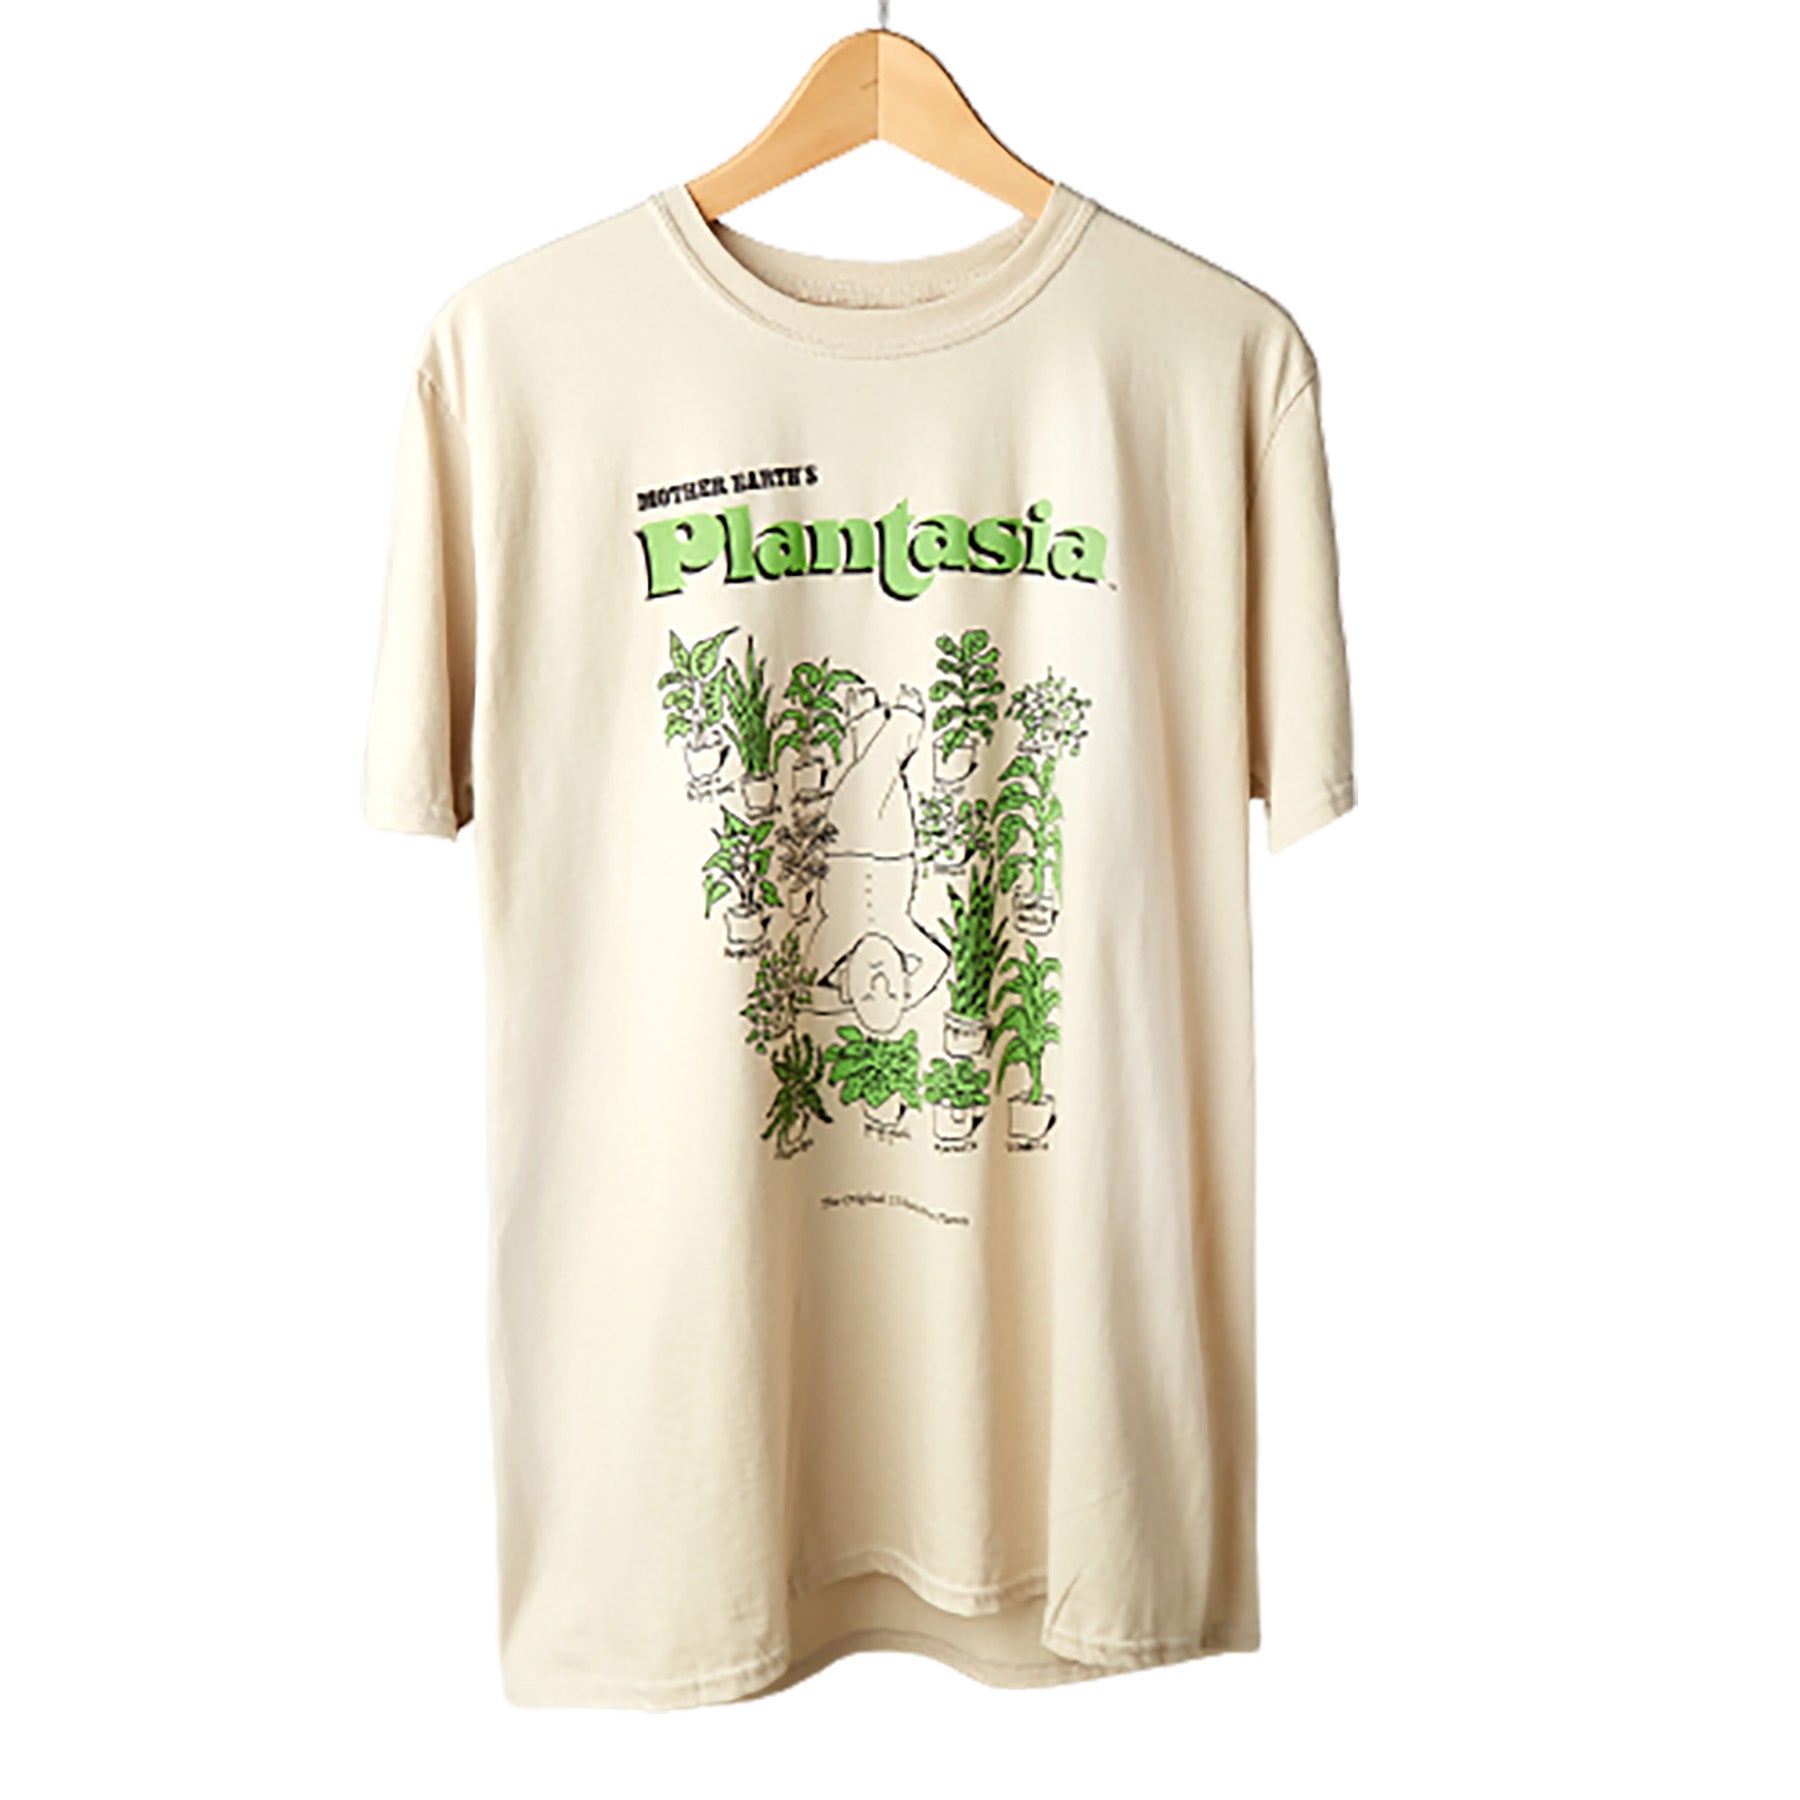 A beige t-shirt featuring an image of plants from a top plant nursery.